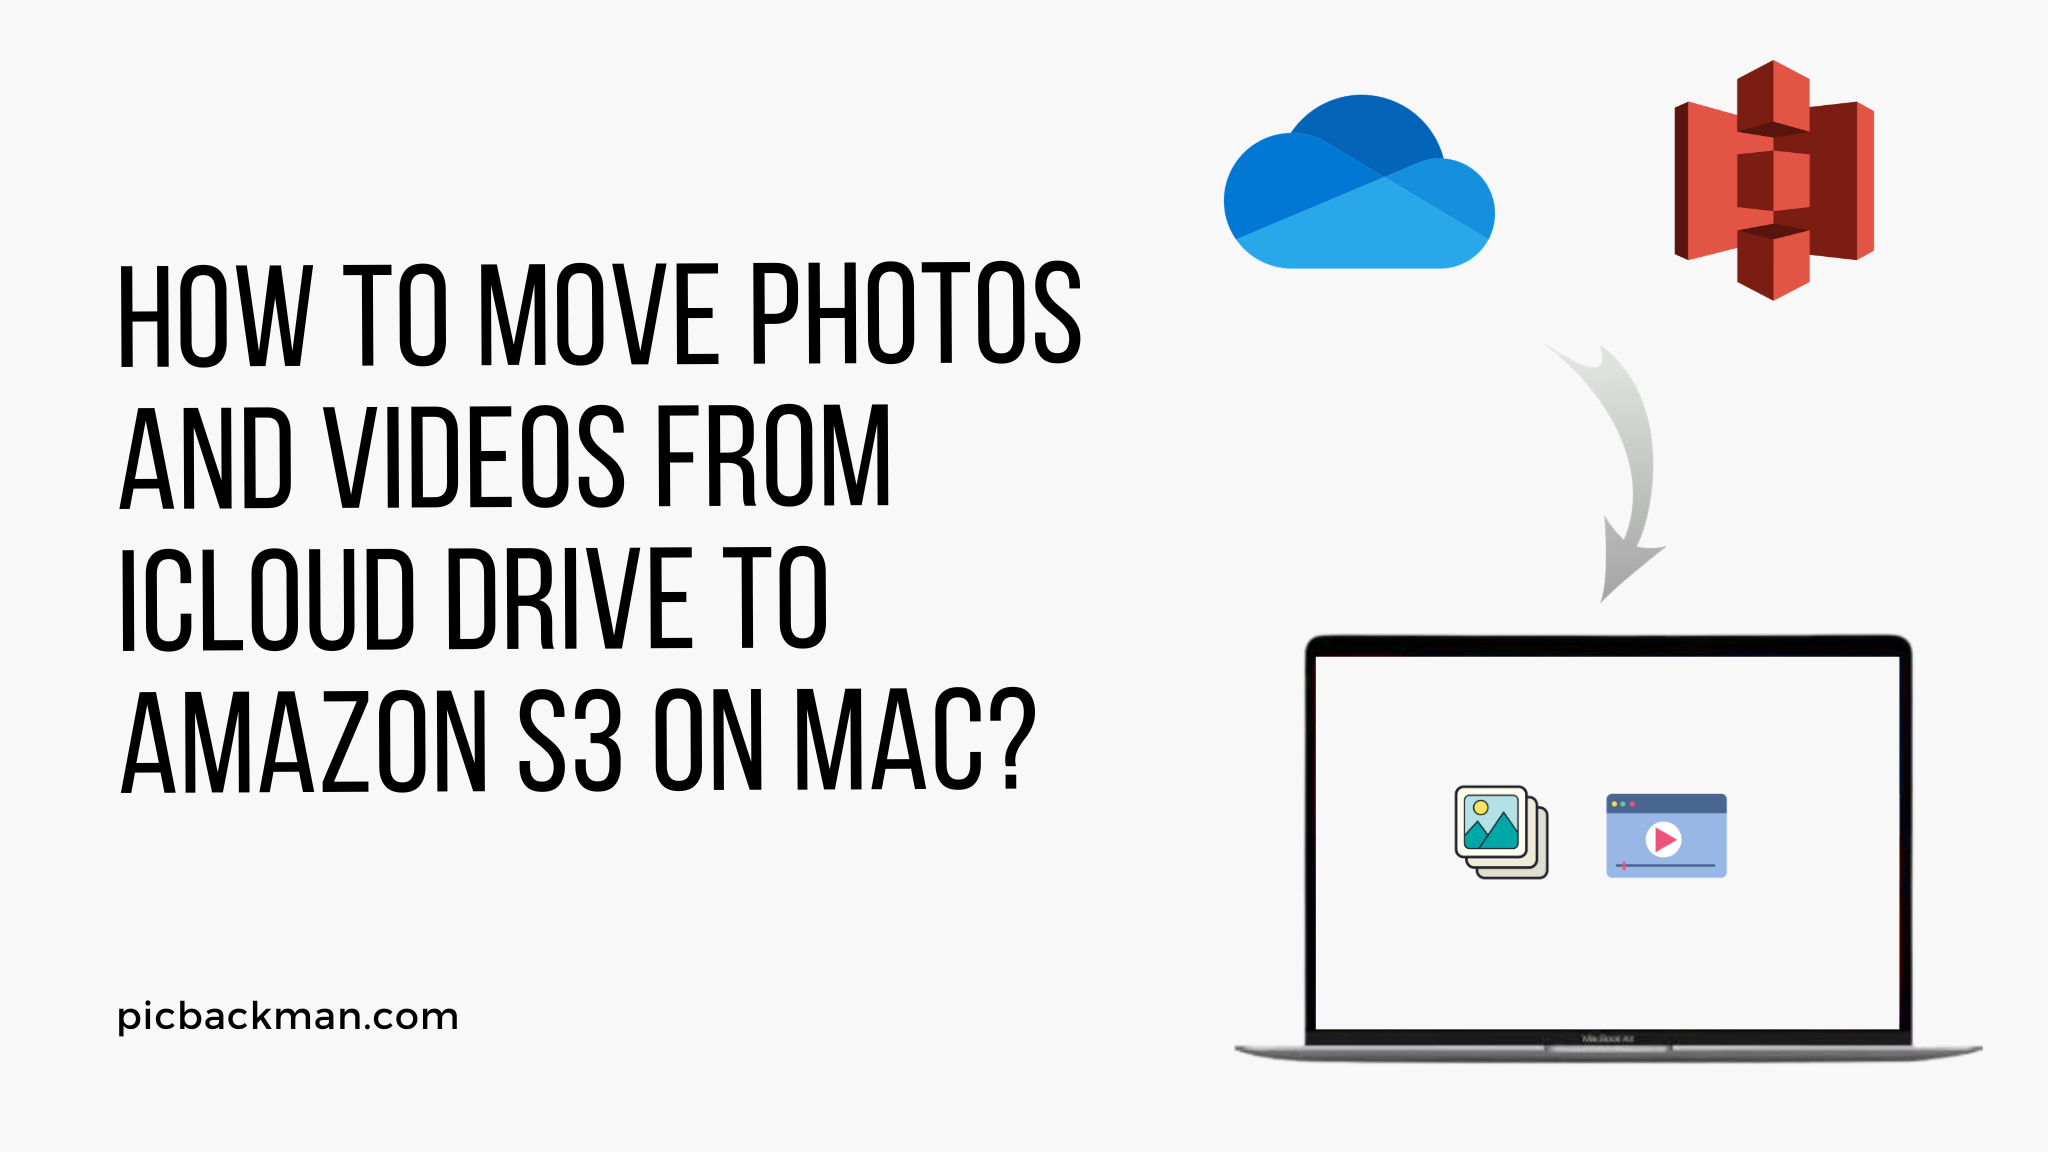 How to Move Photos and Videos from iCloud Drive to Amazon S3 on Mac?